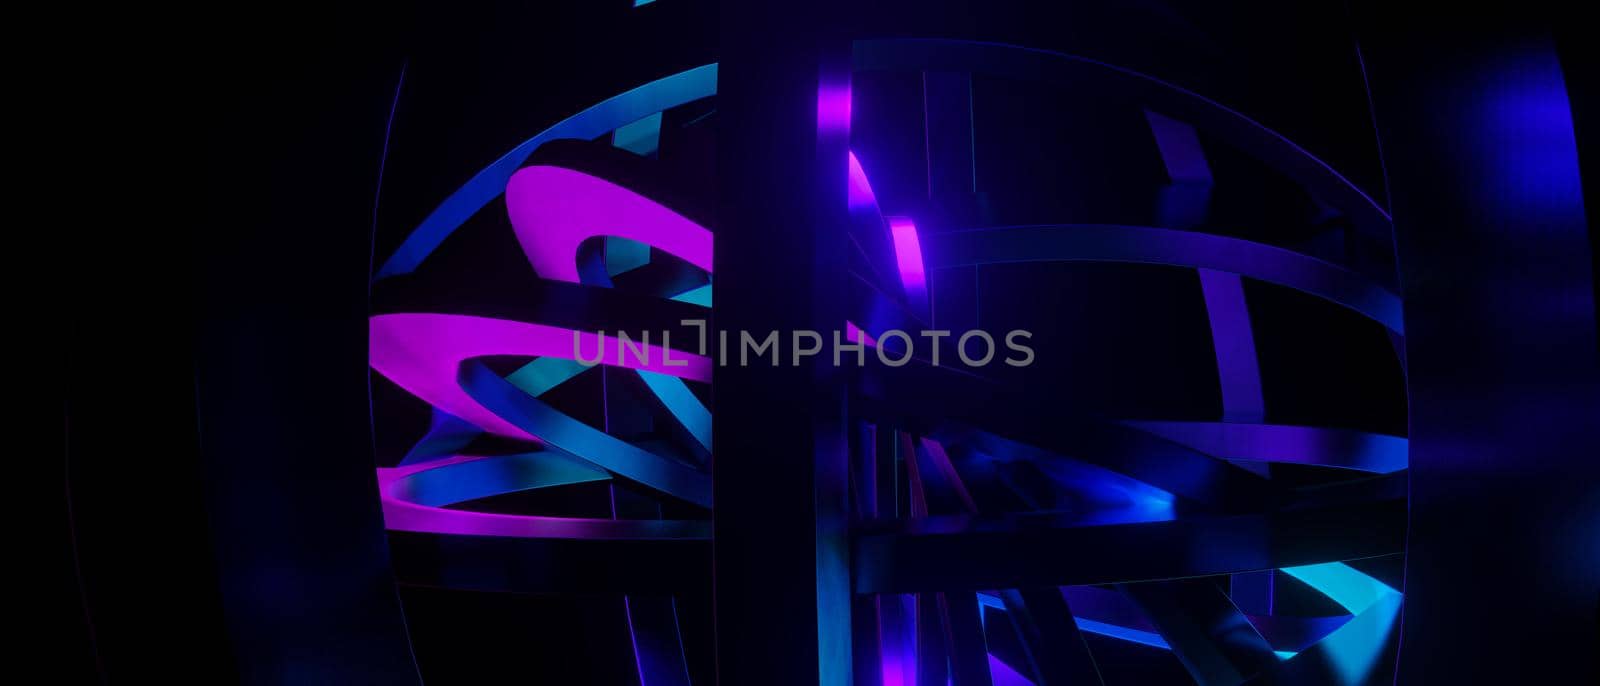 Abstract Elegant Overlapping Lines Or Shapes Violet Background 3D Illustration by yay_lmrb